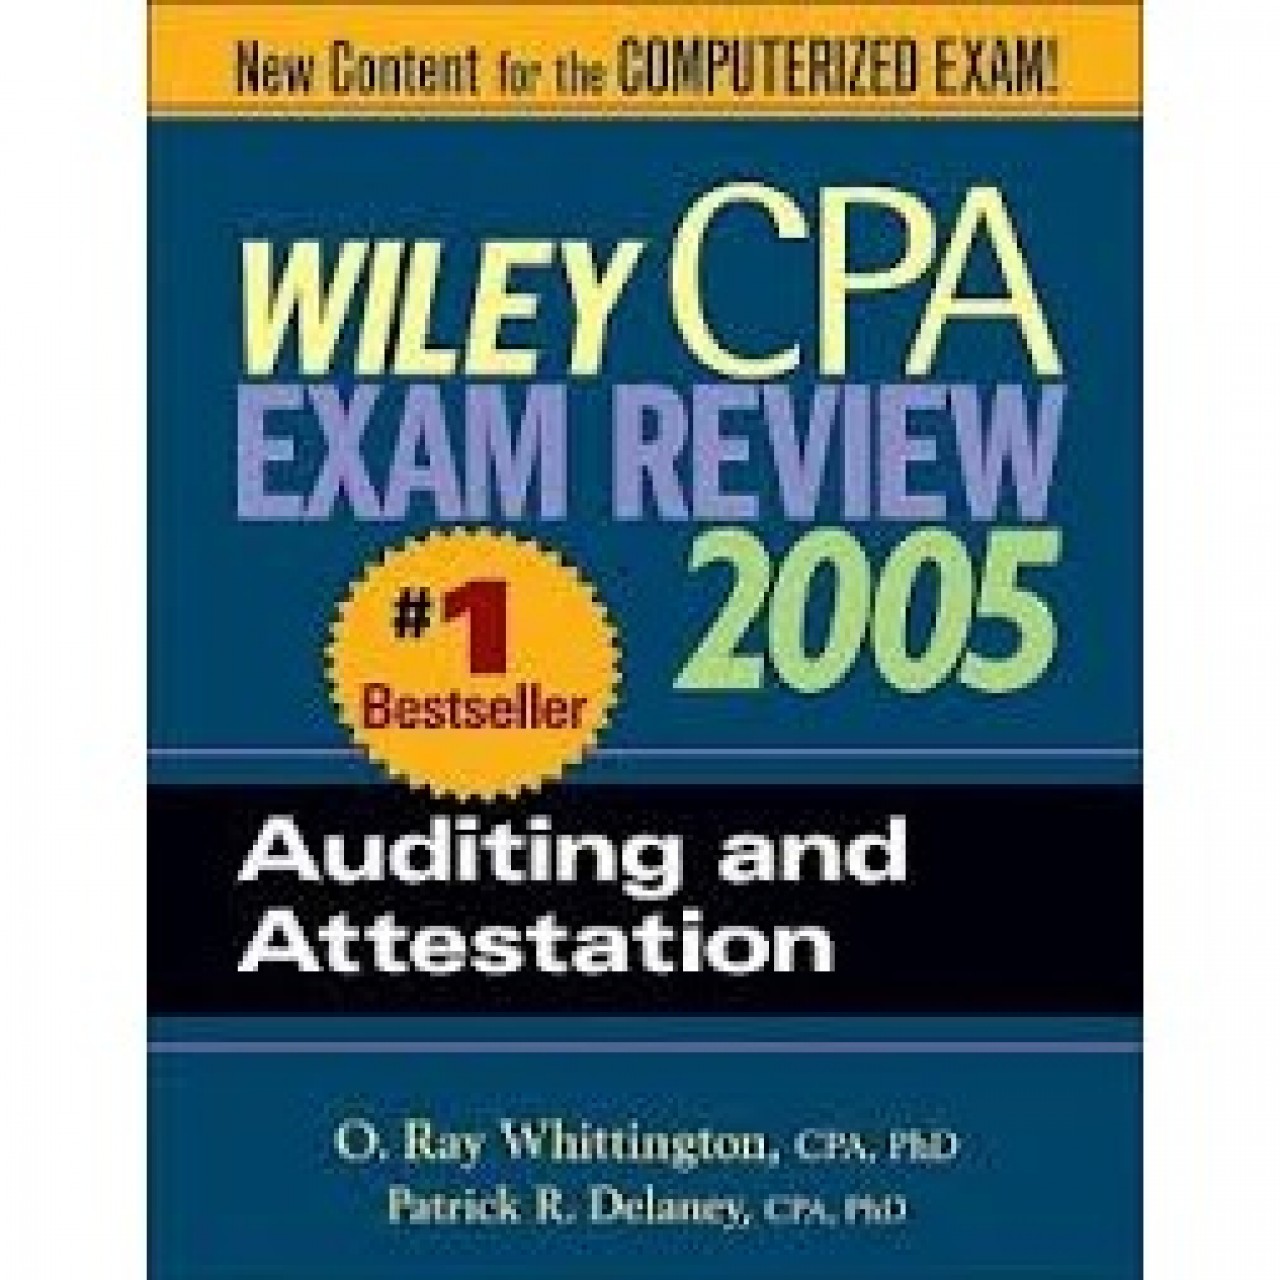 Wiley Cpa Exam Review 2005 By O Ray Whittington - Paperback 2005